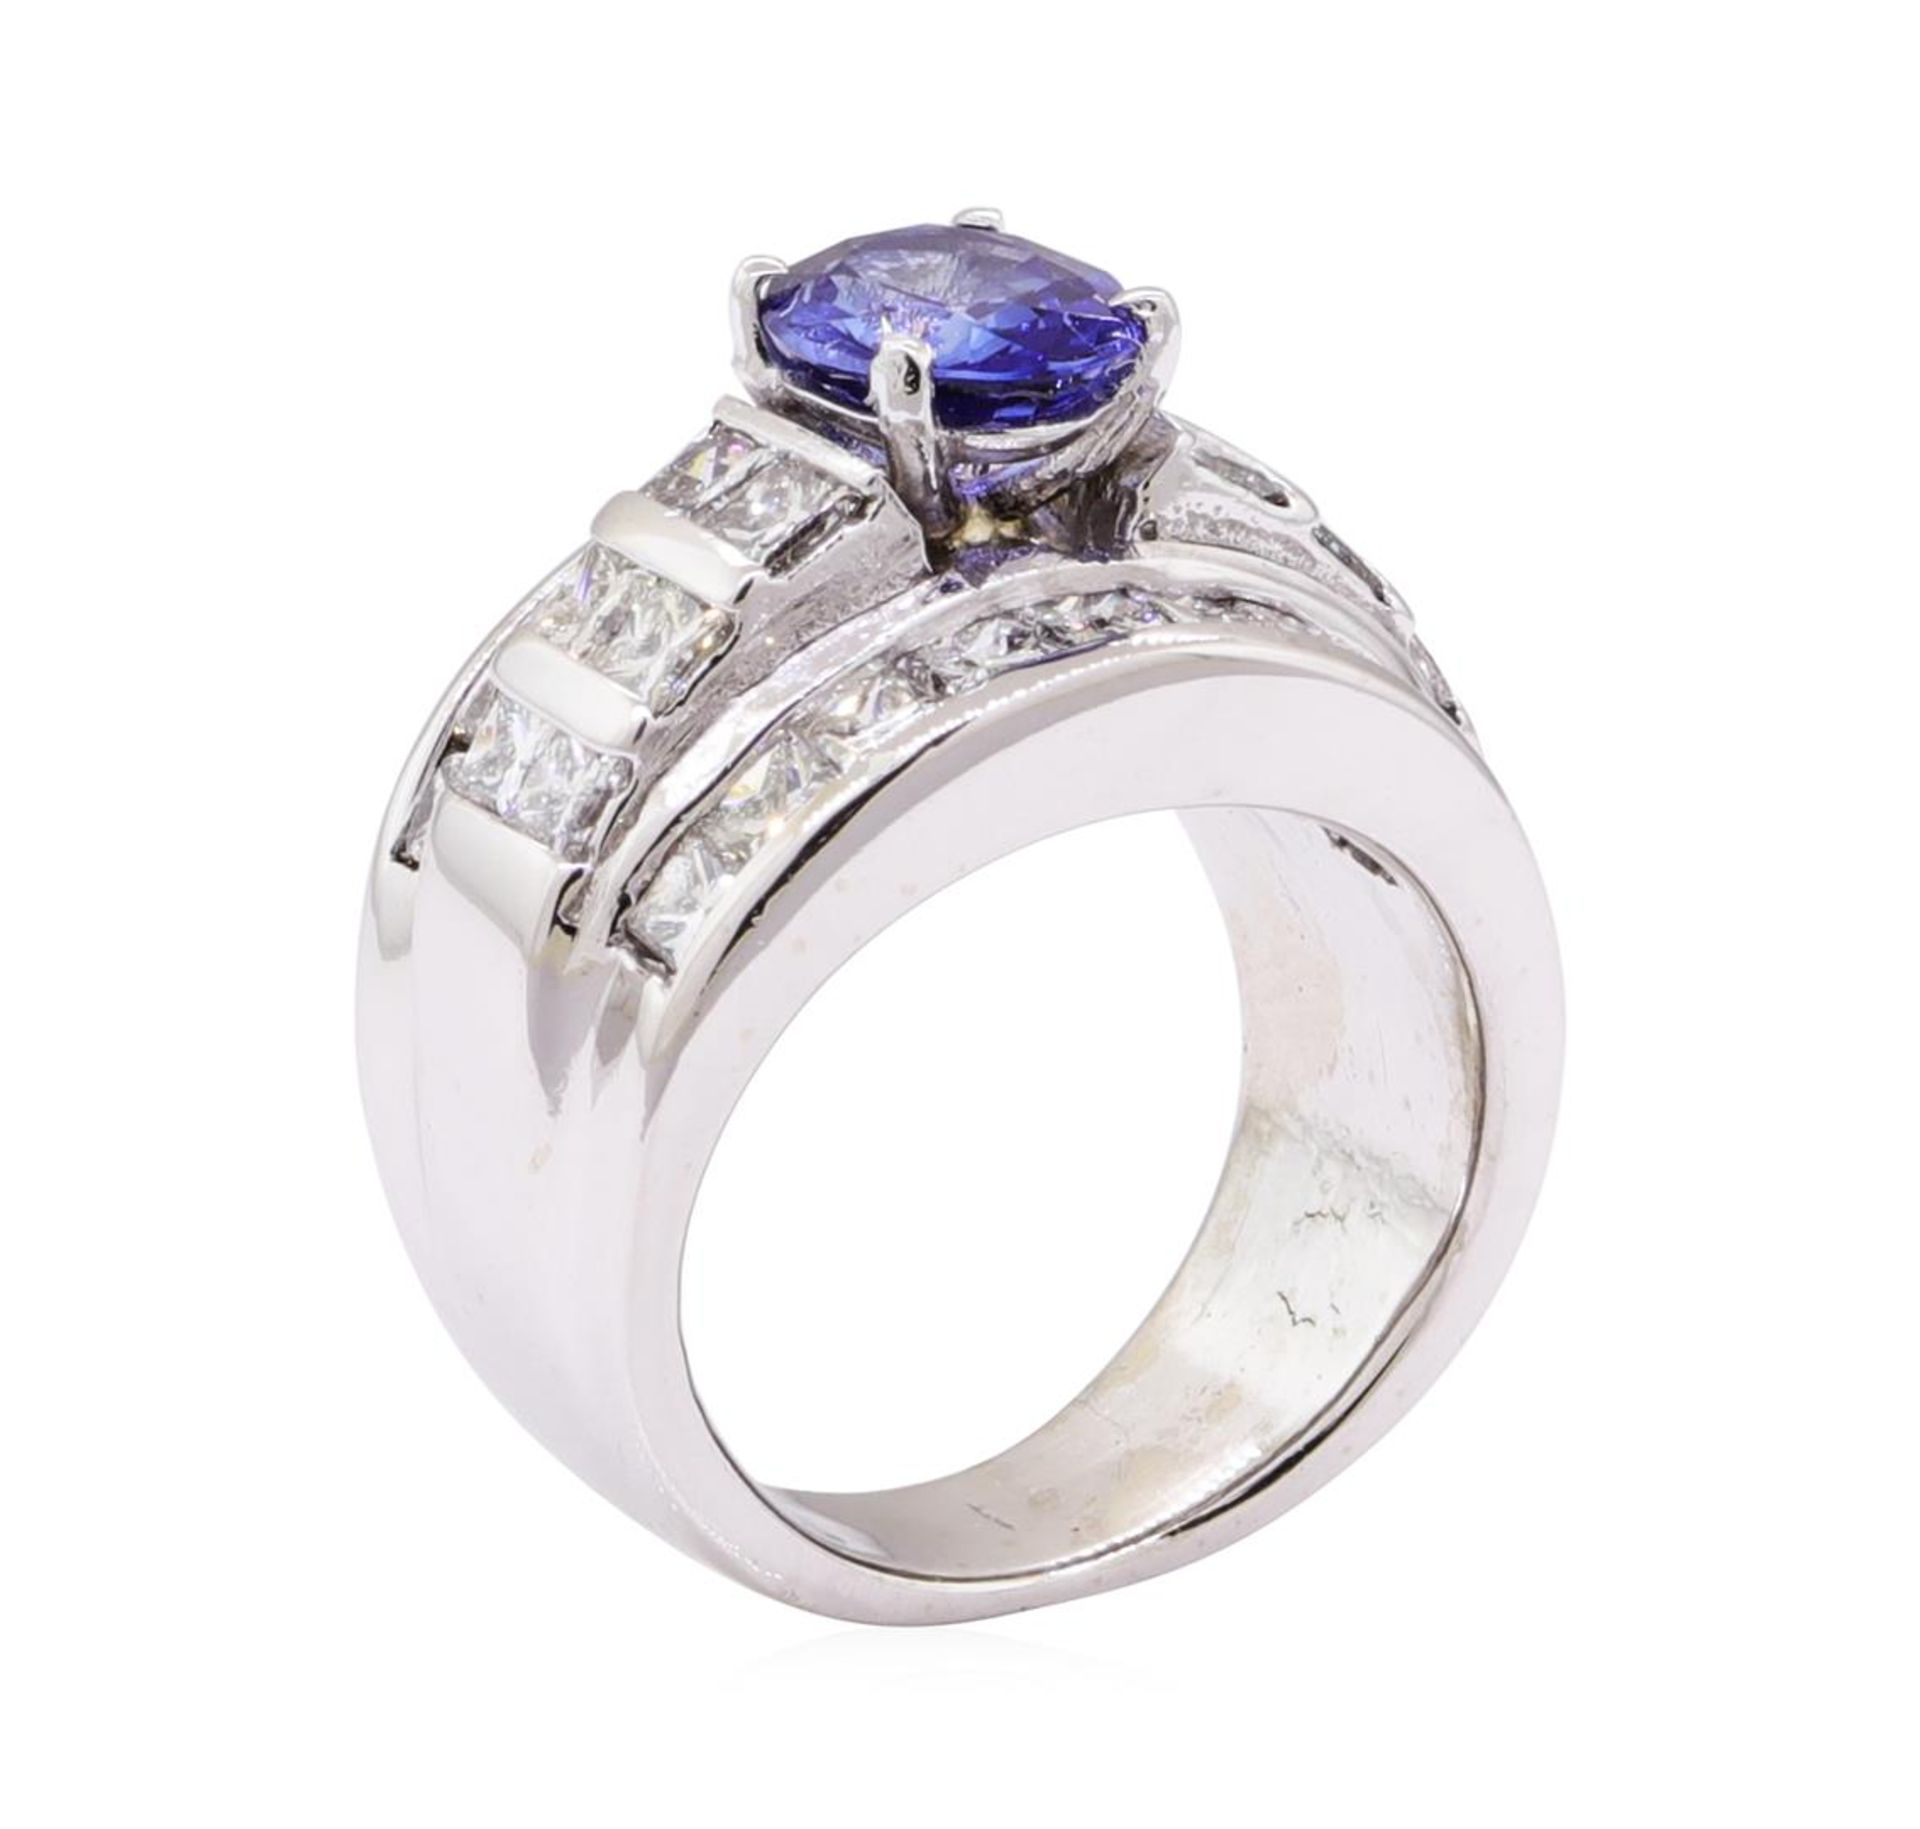 3.02 ctw Sapphire And Diamond Ring - 14KT White Gold - Image 4 of 5